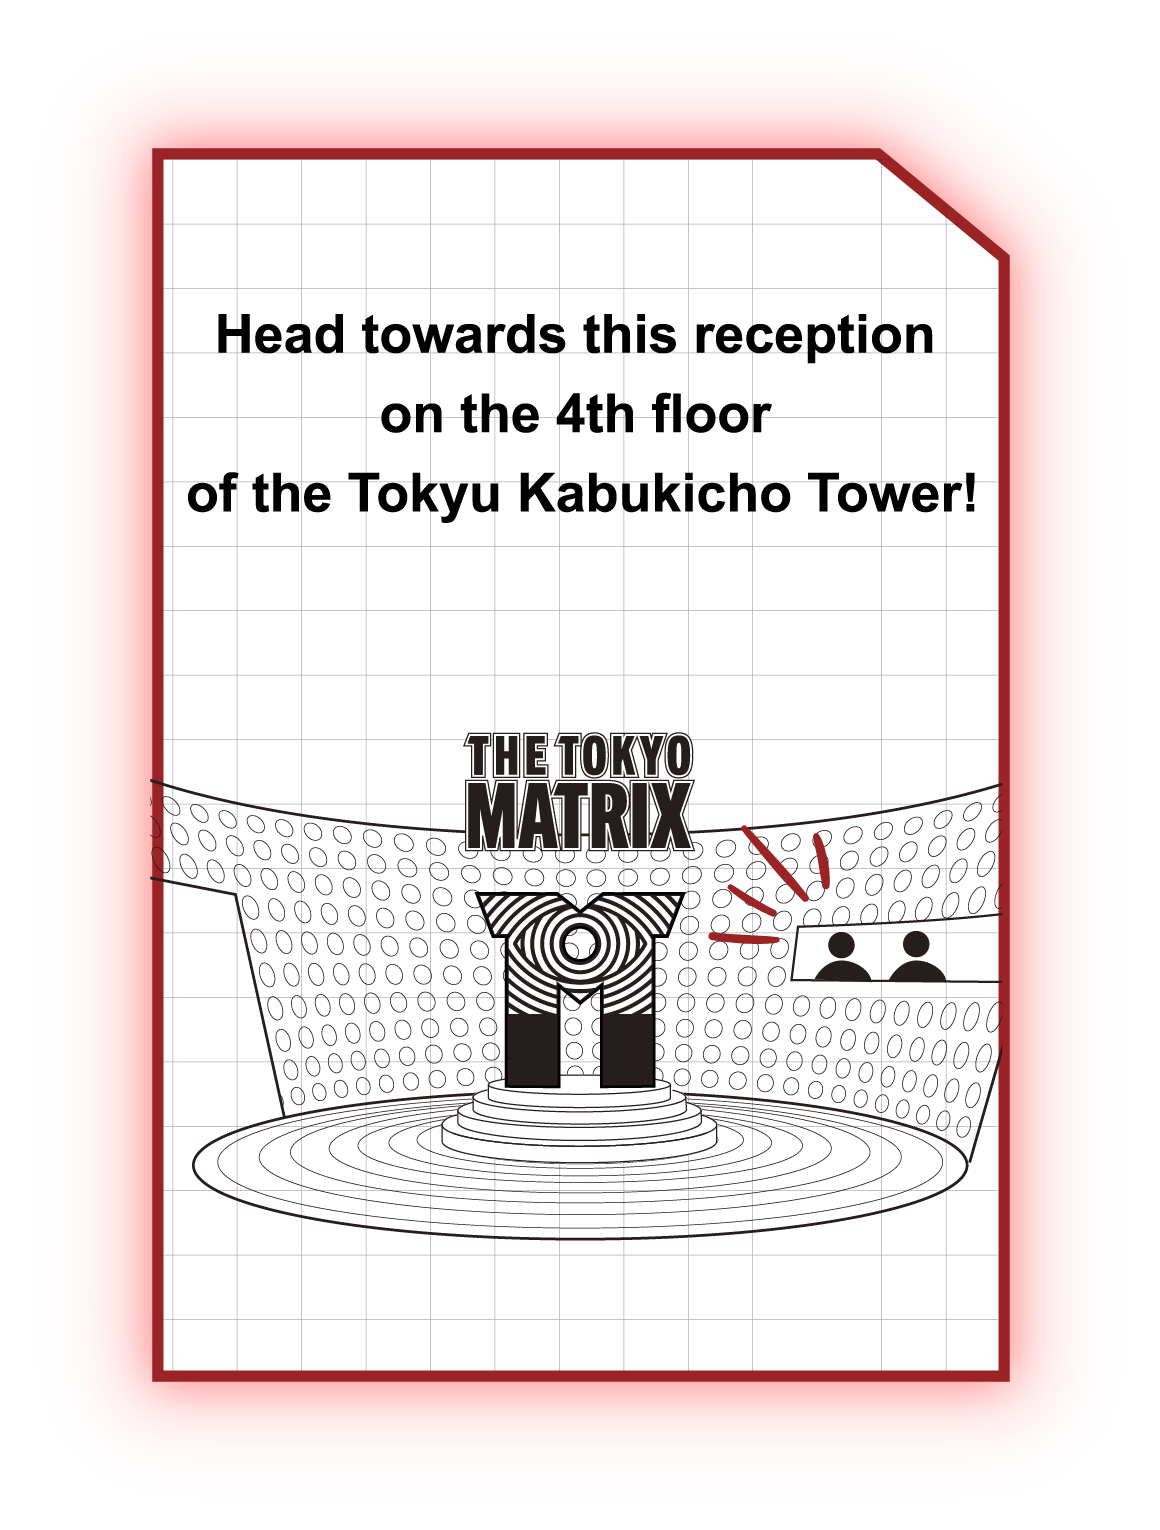 Go to the venue on yhe reservation date and time. Go to this reception desk on the 4th floor at Tokyu Kabukicho Tower!